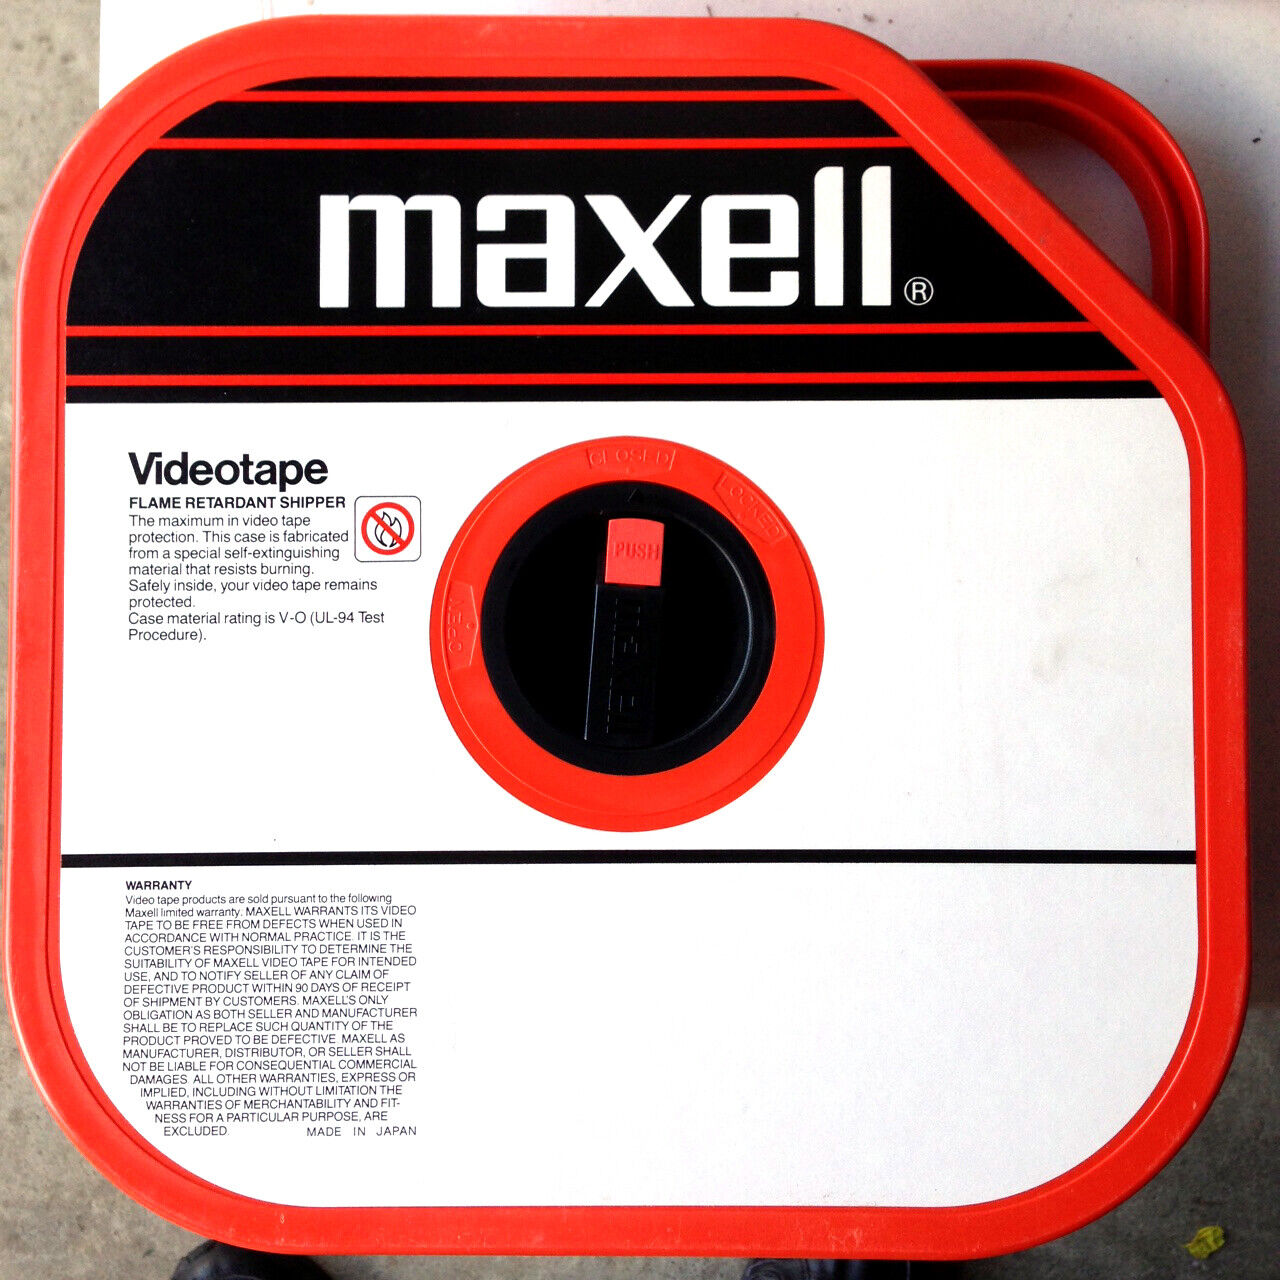 NEW Maxell CV60S Broadcast Quality Videotape, CV60, 2500' in Fire Retardant Case Maxell Does Not Apply